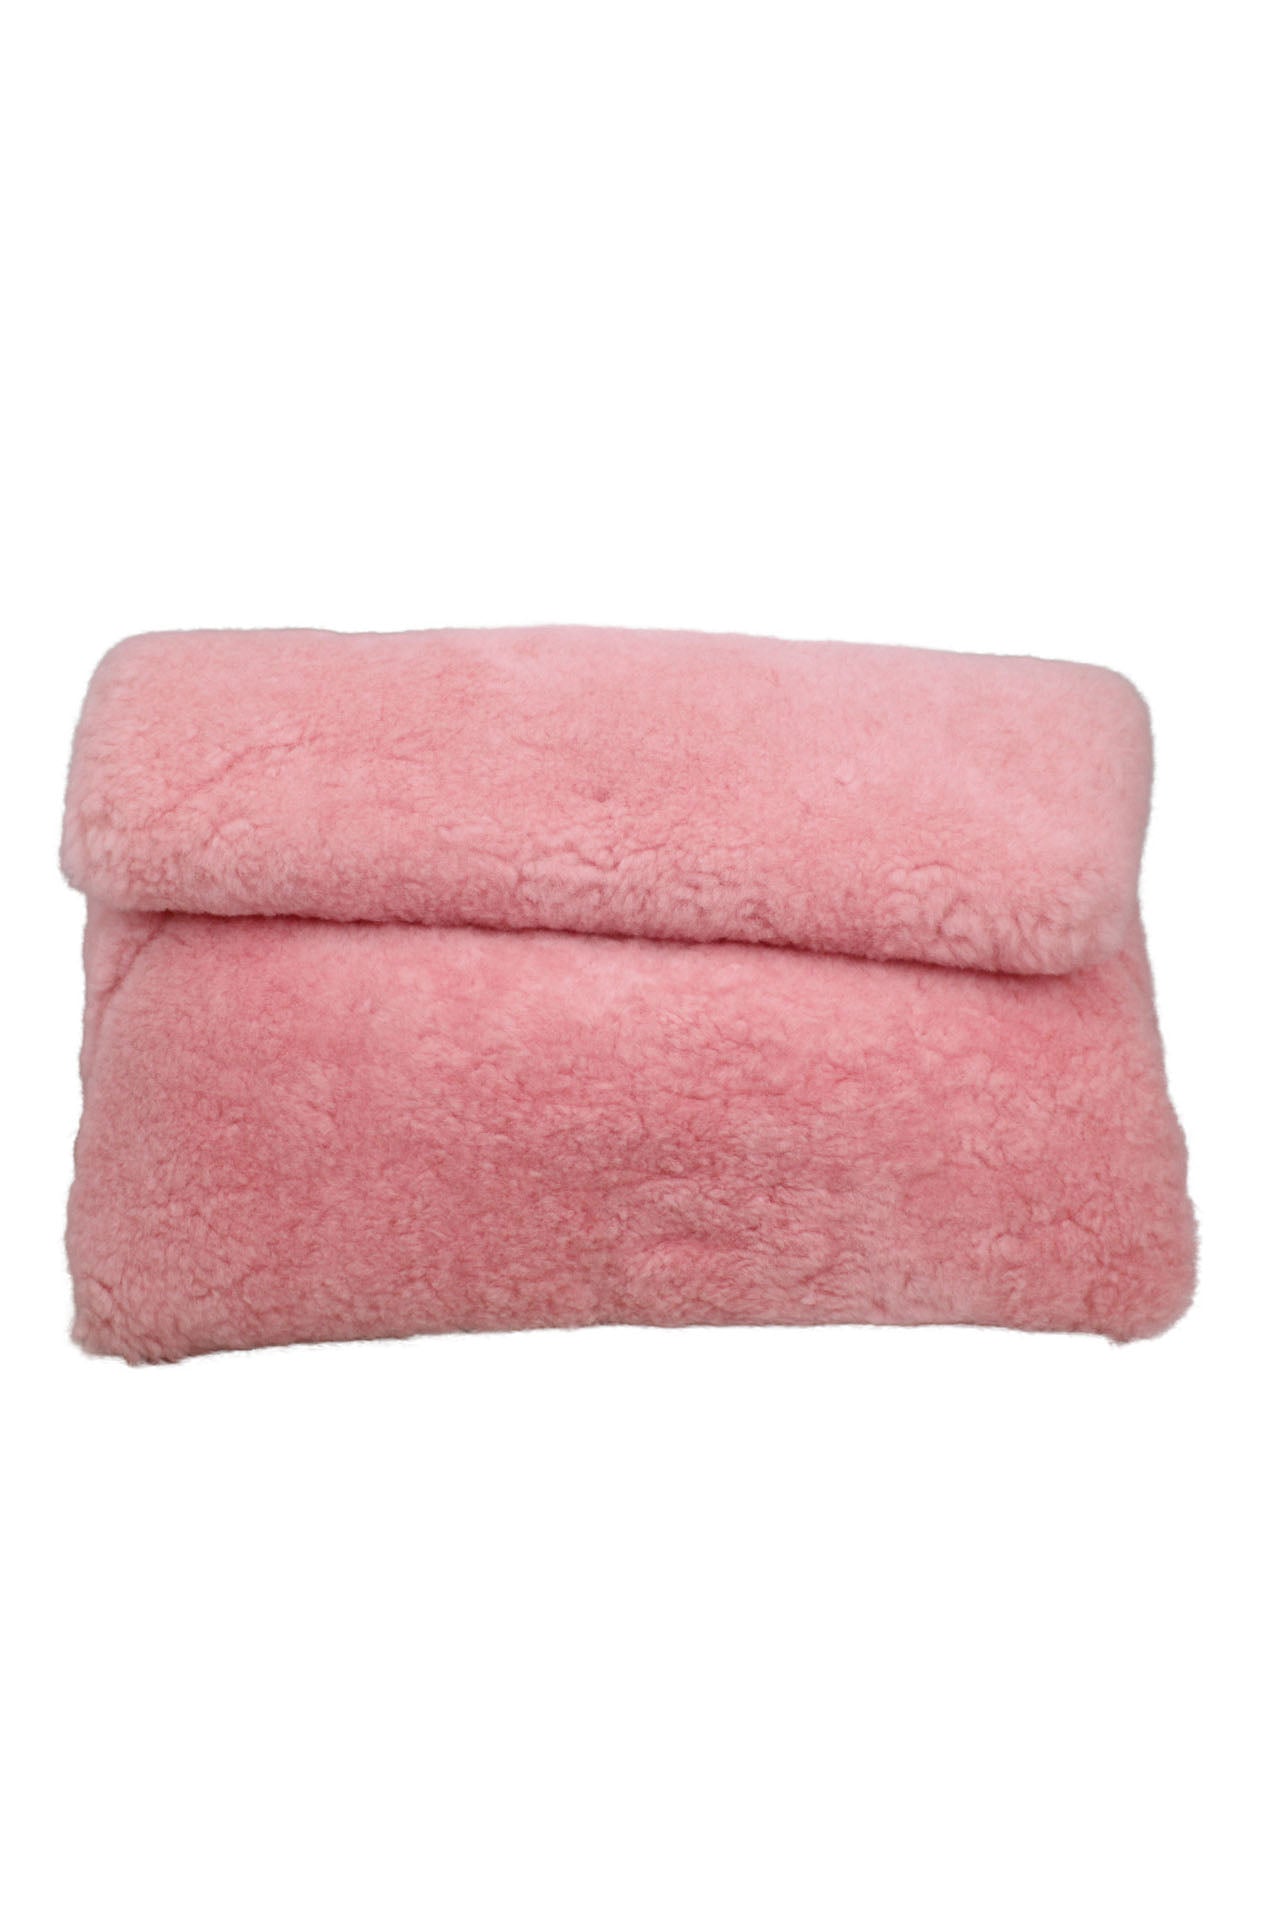 front of hache pink genuine sheepskin shearling fur clutch bag. magnetic flap closure. suede leather lining with zippered lining pocket. 